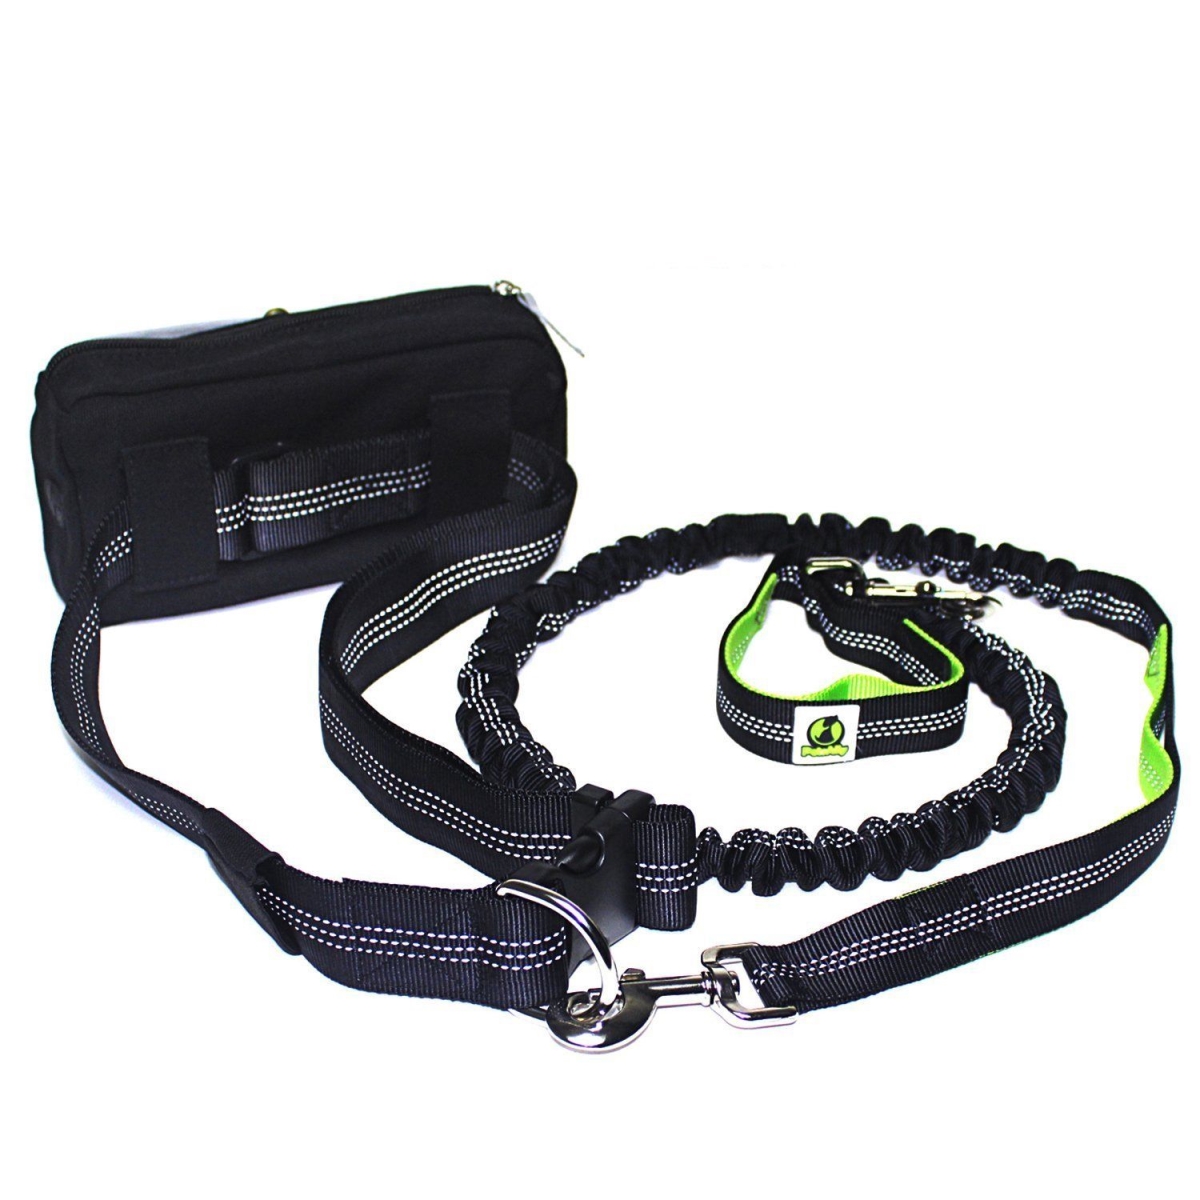 Dle943 Durable Dual Handle Bungee 54 In. Hands Free Medium & Large Dog Leash, Reflective Adjustable Waist Belt